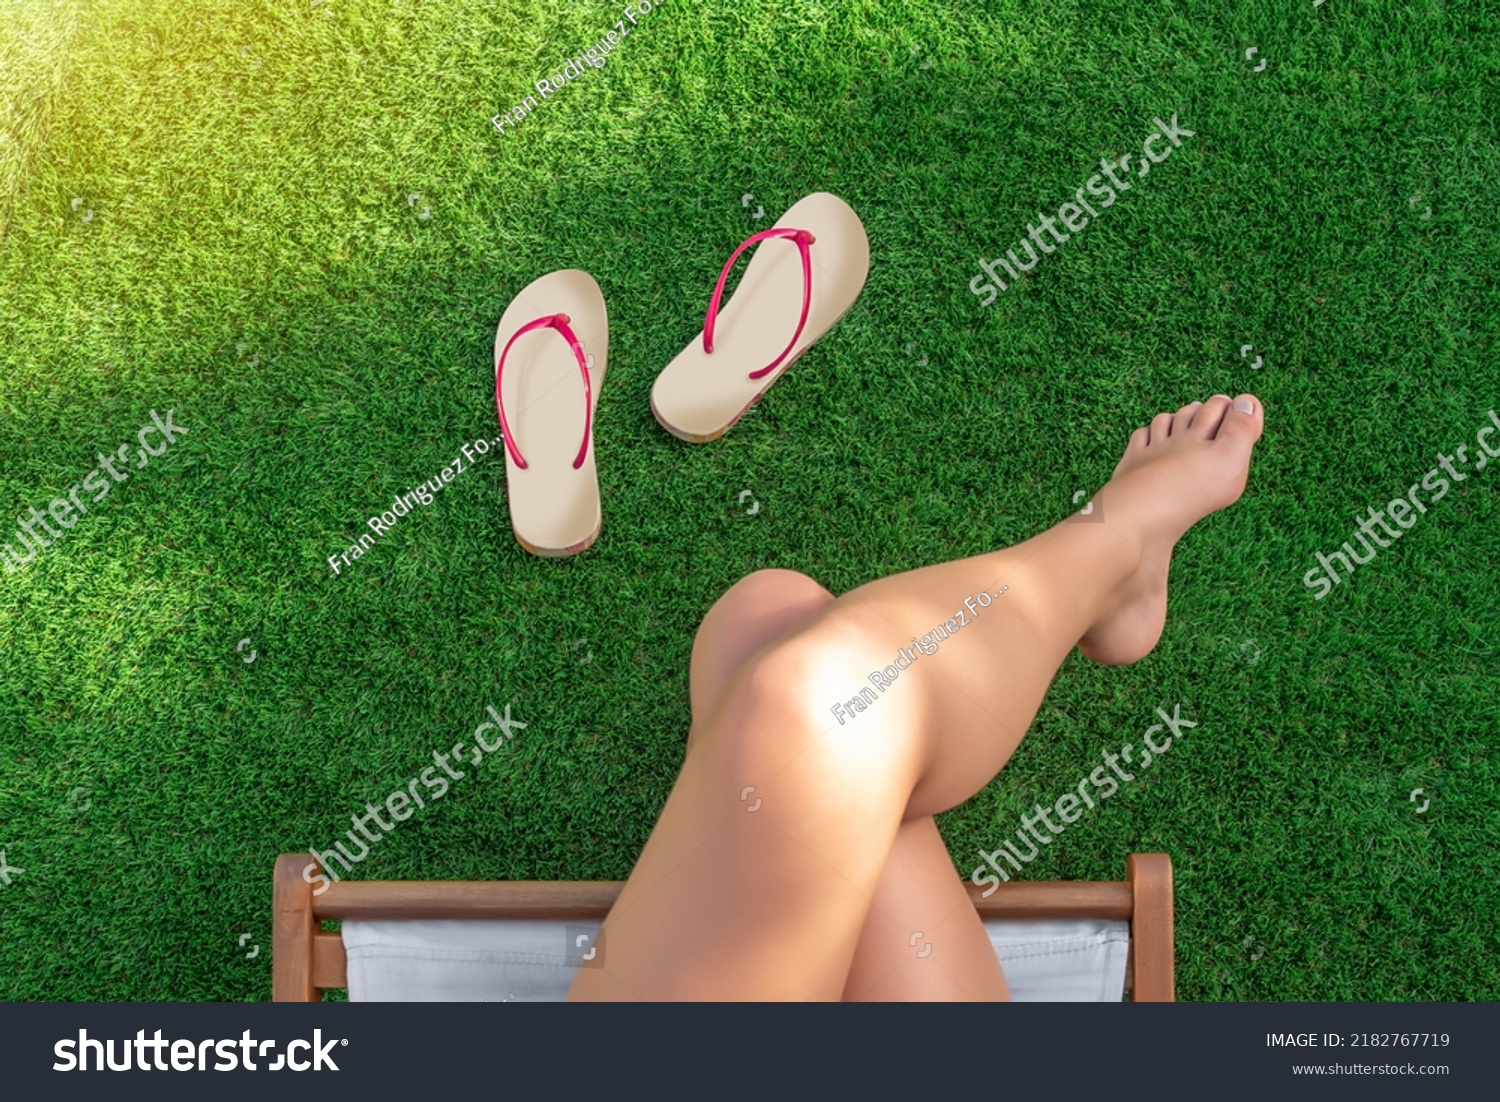 Selective focus of a girl sitting in a hammock on artificial turf with bare feet and flip-flops on the grass #2182767719